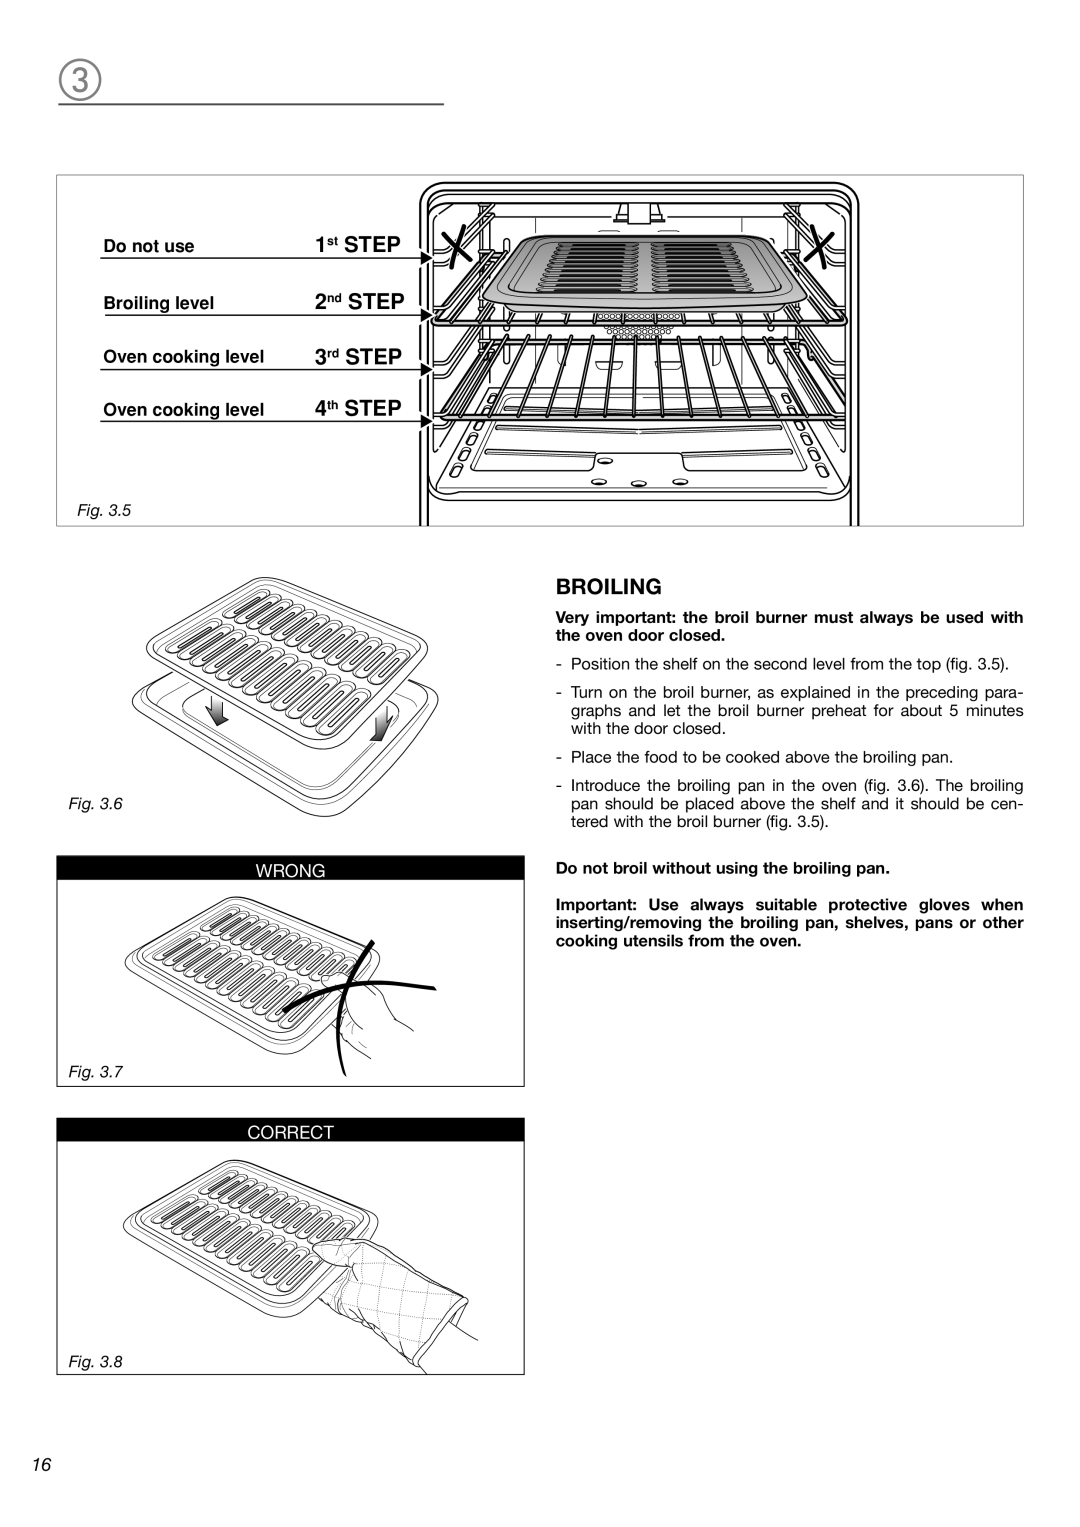 Verona VEFSGG 244 1st STEP, 2nd STEP, 3rd STEP, 4th STEP, Do not use, Broiling level, Oven cooking level, Wrong 